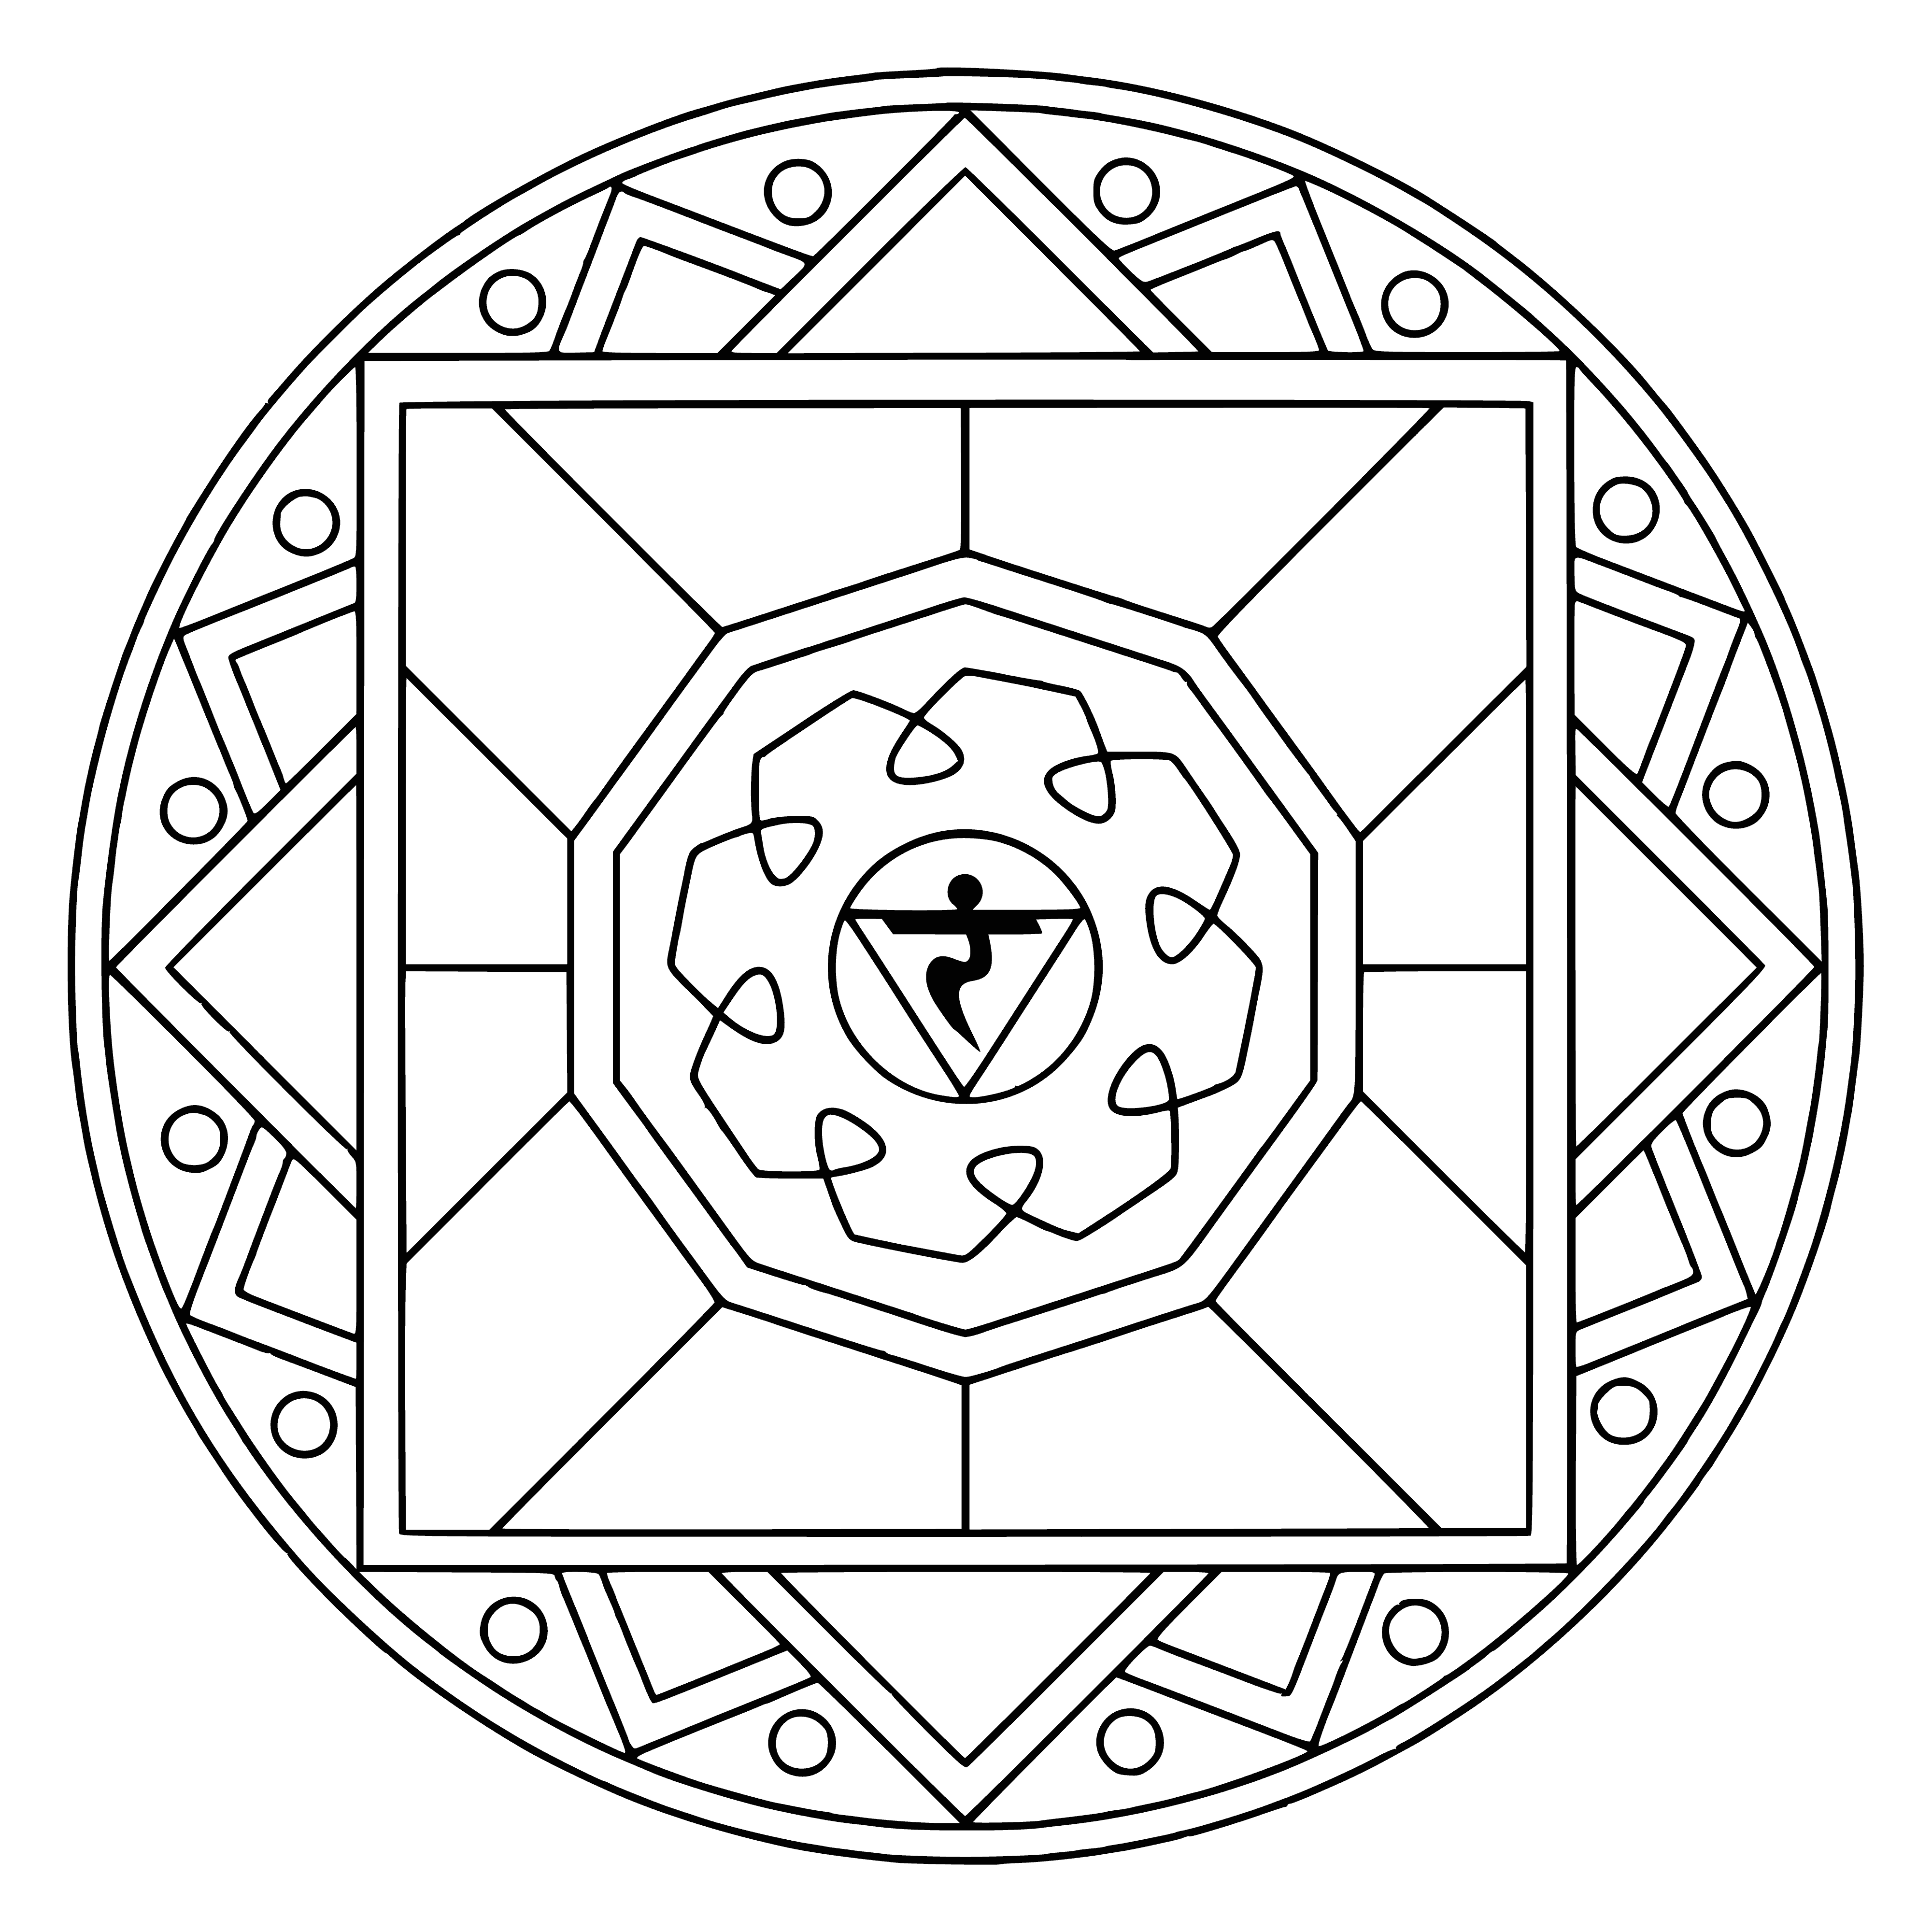 coloring page: A mandala represents the cosmos in Hinduism & Buddhism. It's used as a tool for meditation and believed to represent both the universe and the enlightened mind.